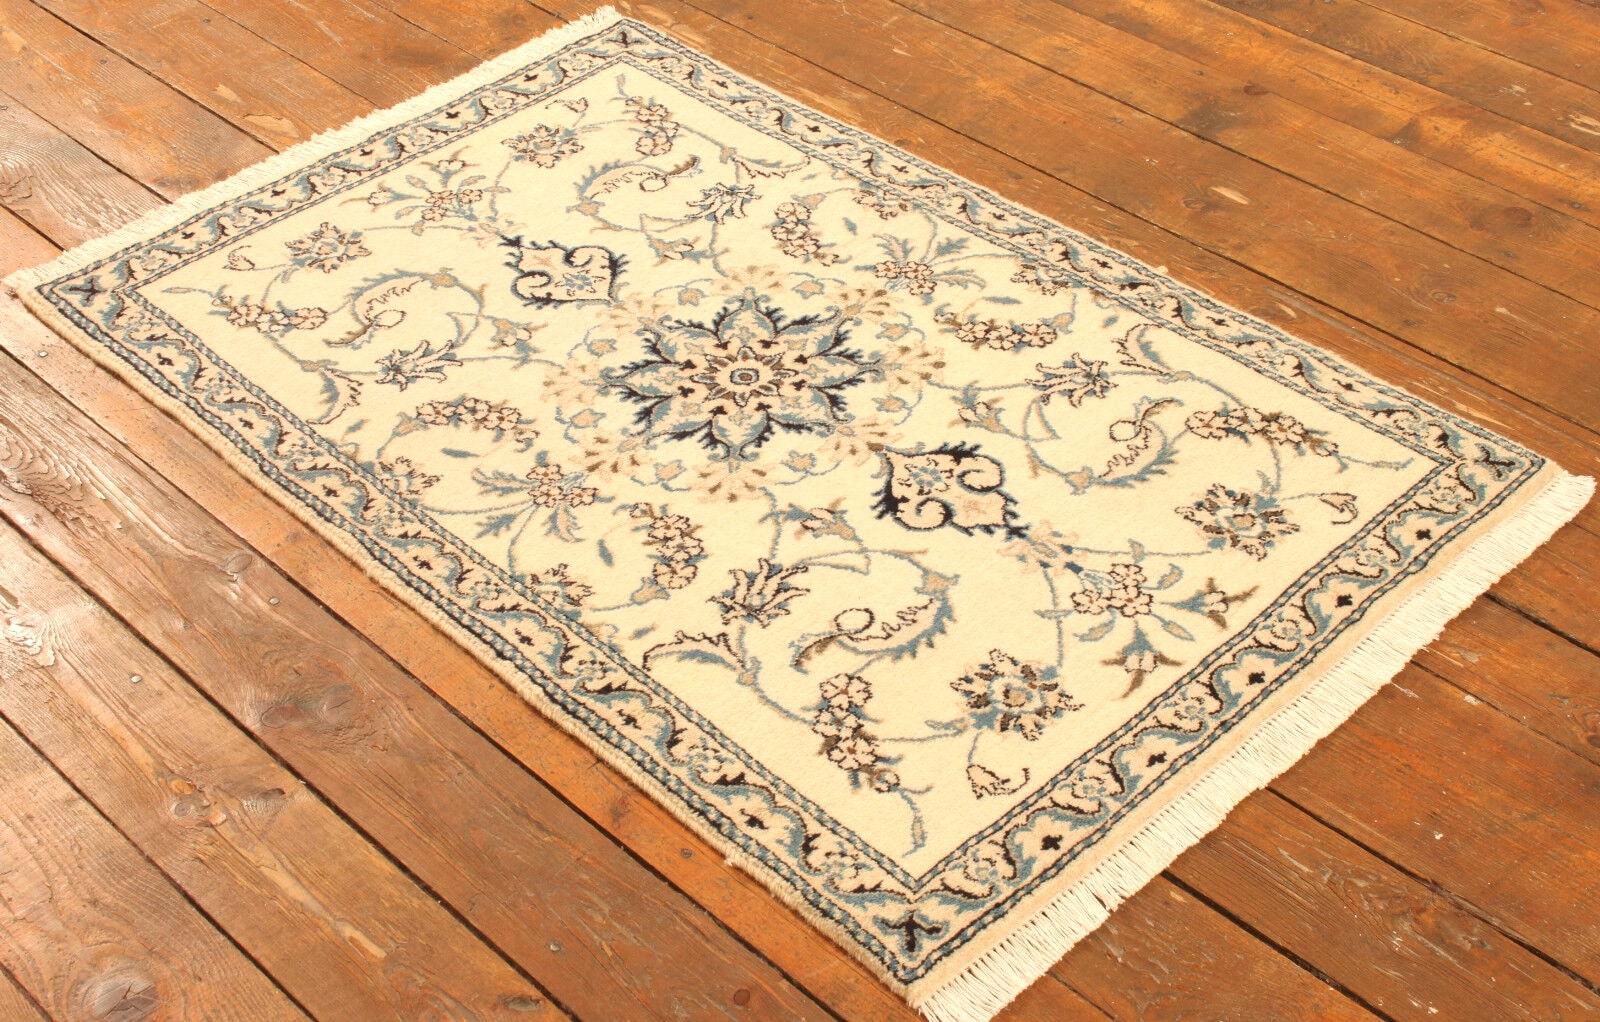 Wool Handmade Vintage Persian Style Nain Rug 2.9' x 4.4', 1990s - 1T19 For Sale